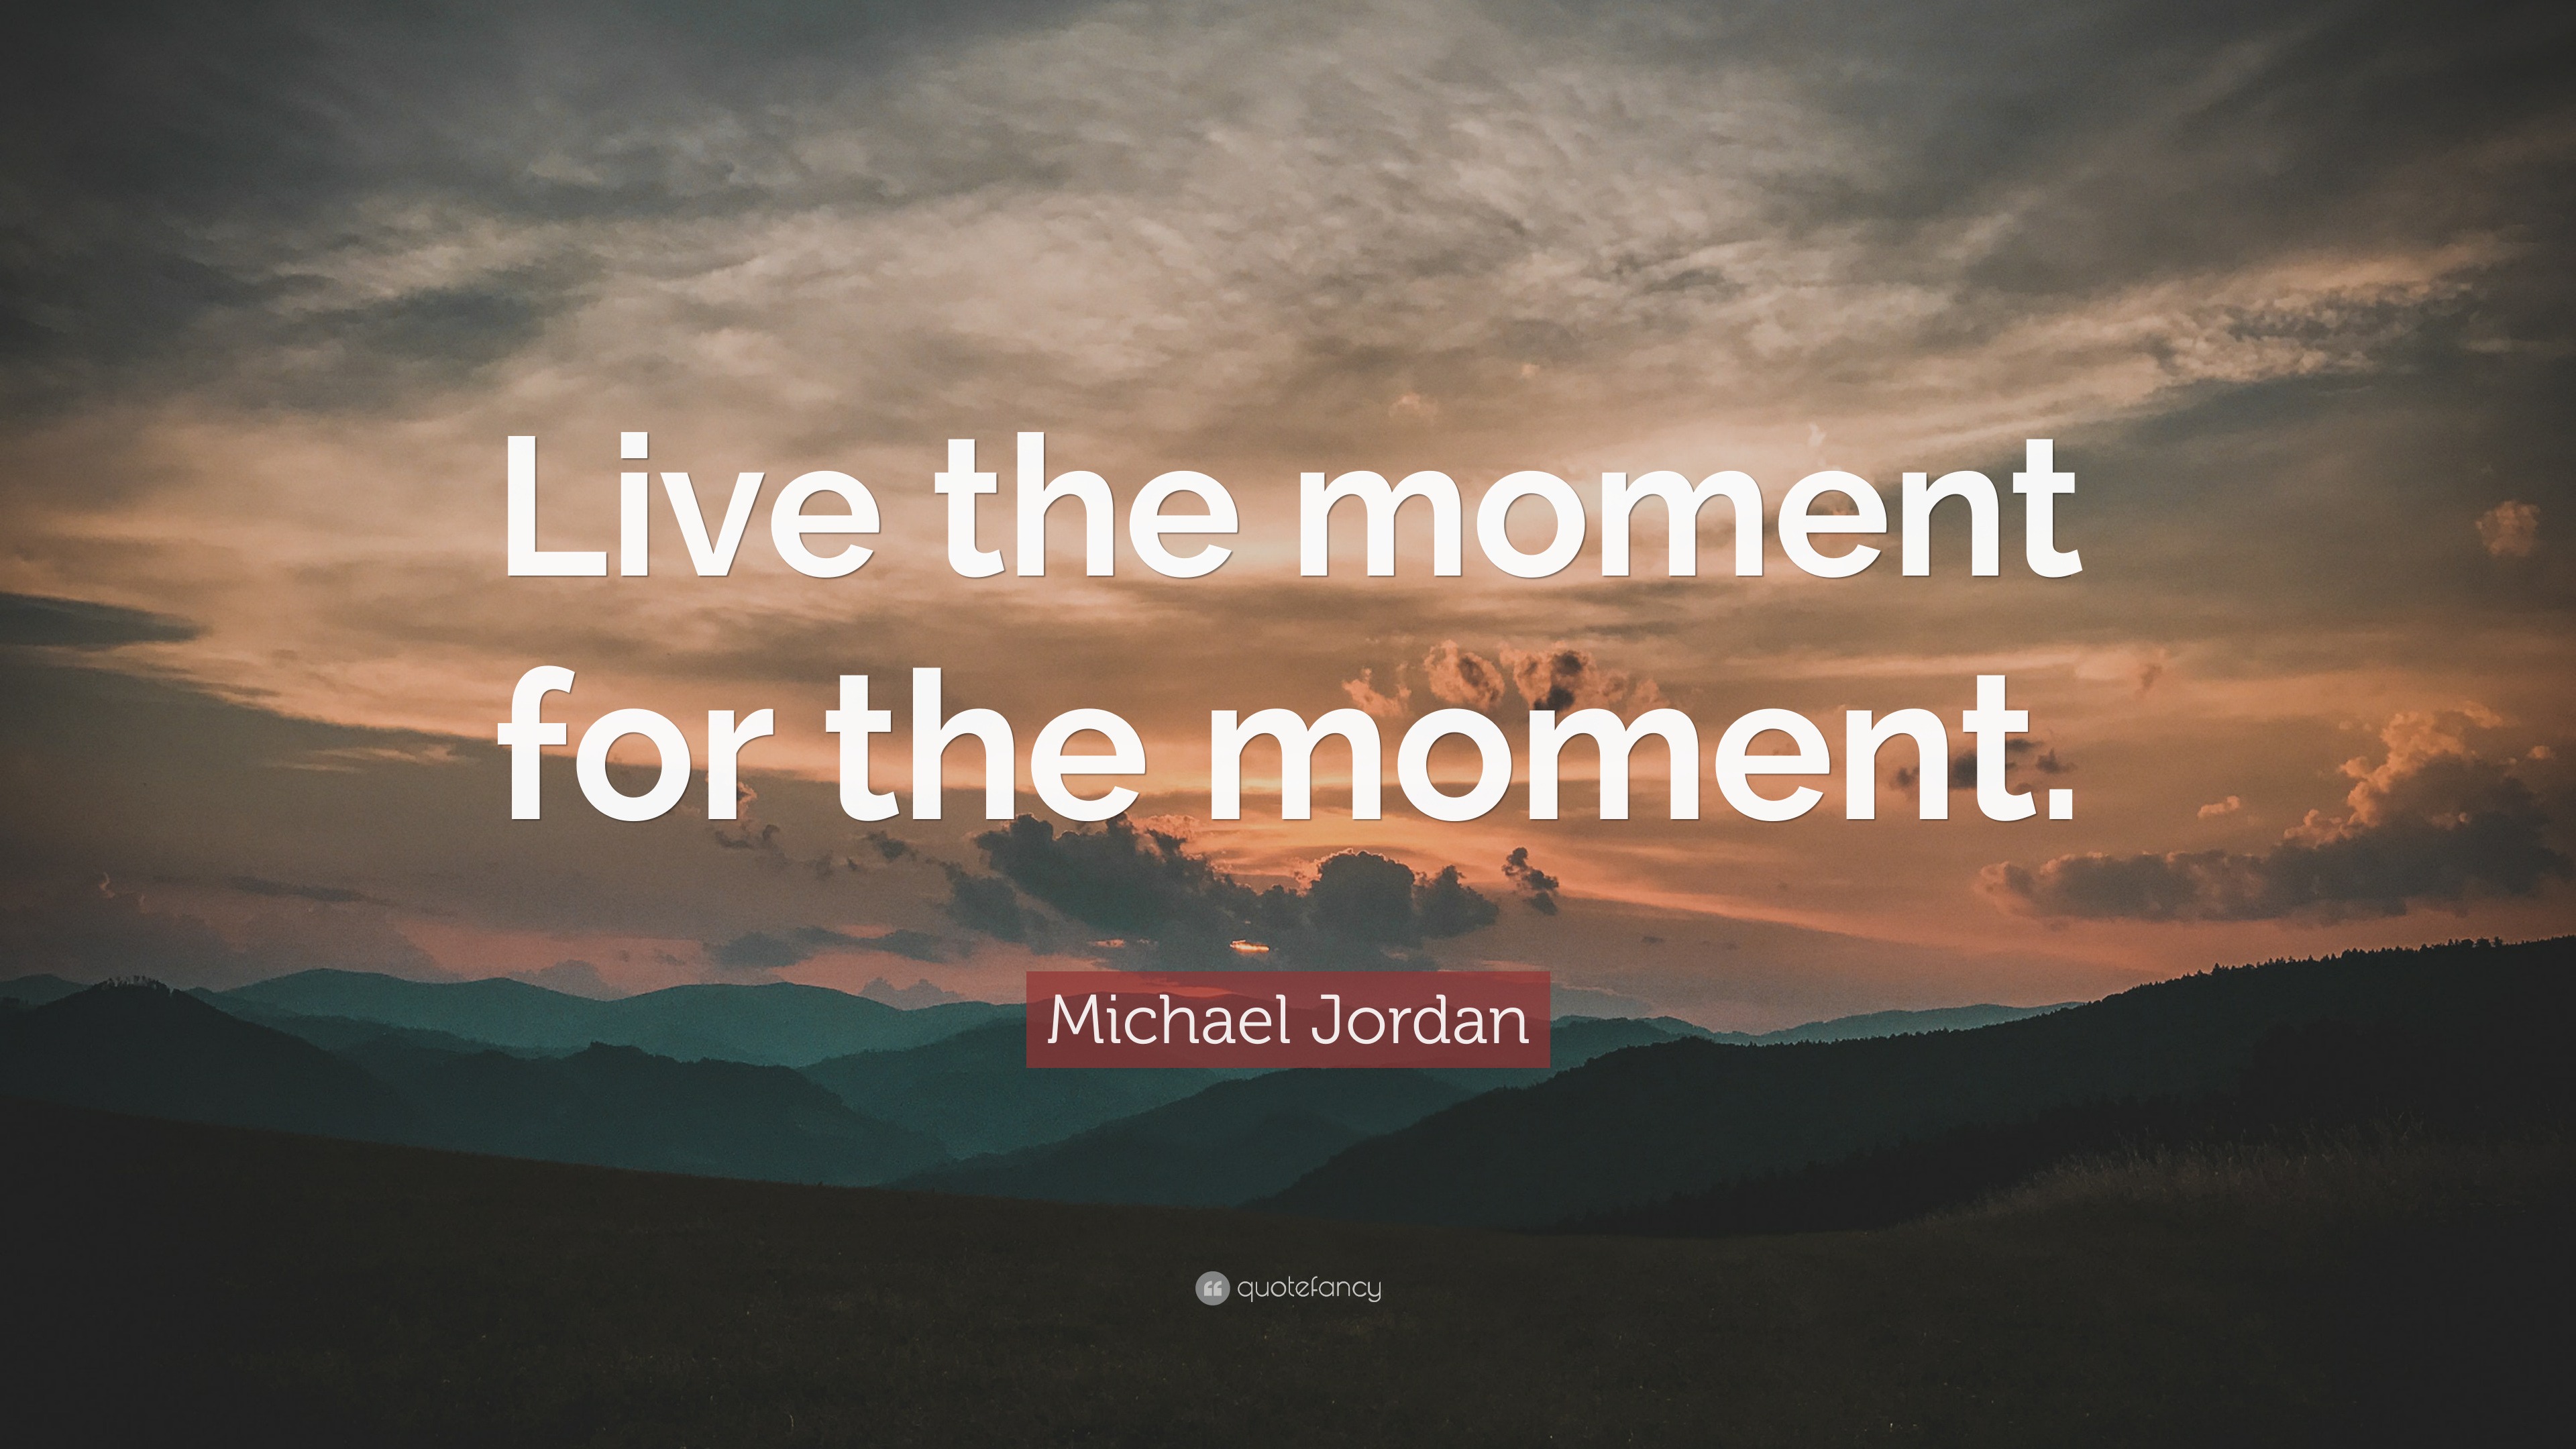 Michael Jordan Quote: “Live the moment for the moment.”